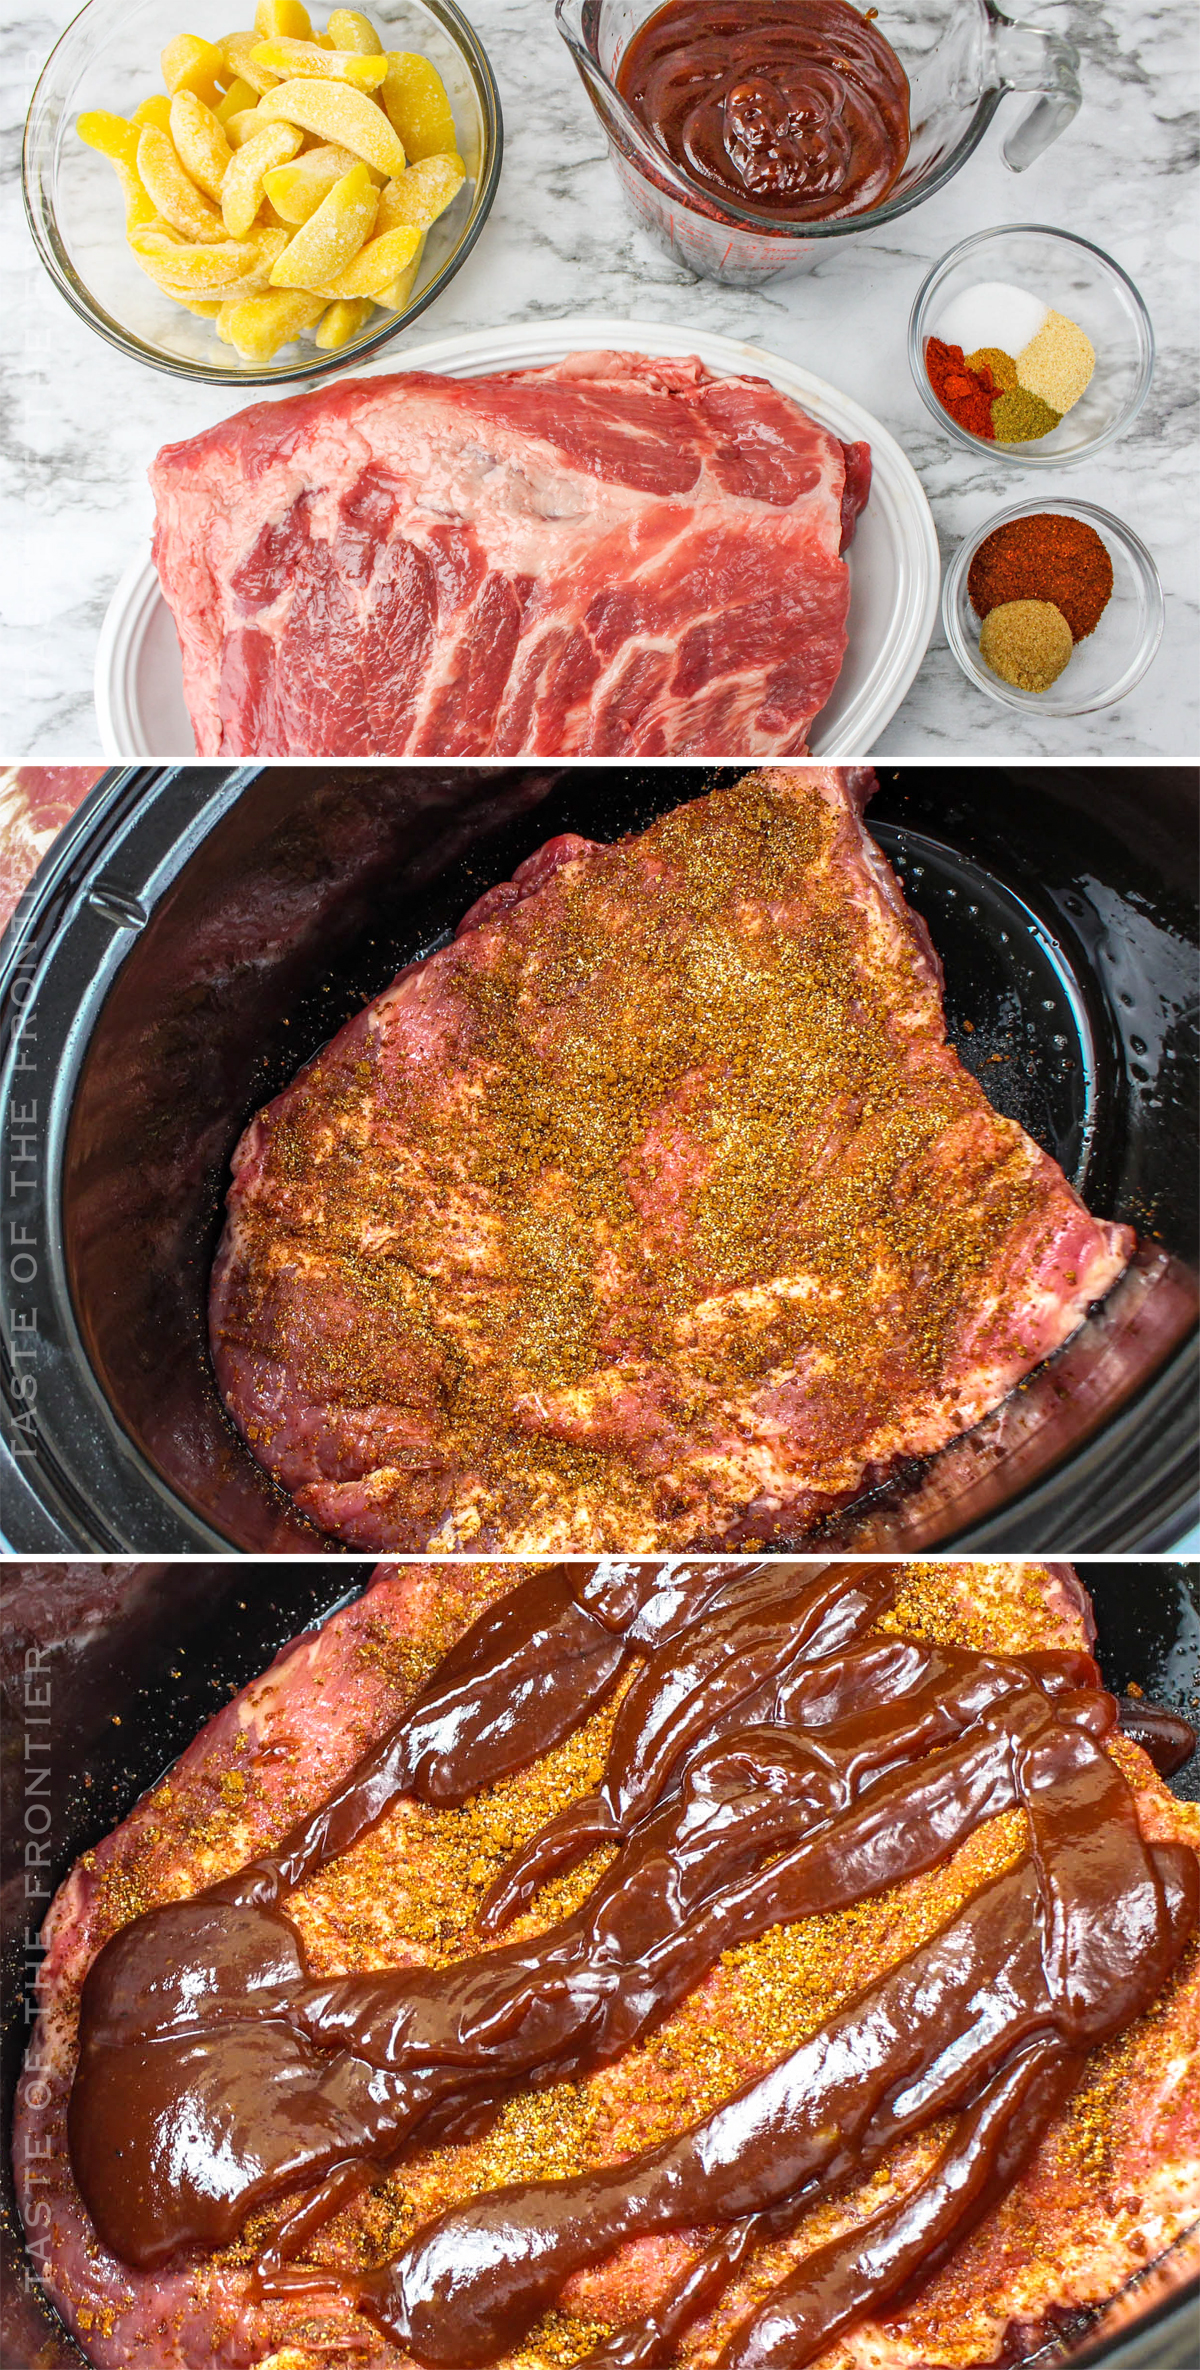 ingredients for Slow Cooker Barbecue Ribs